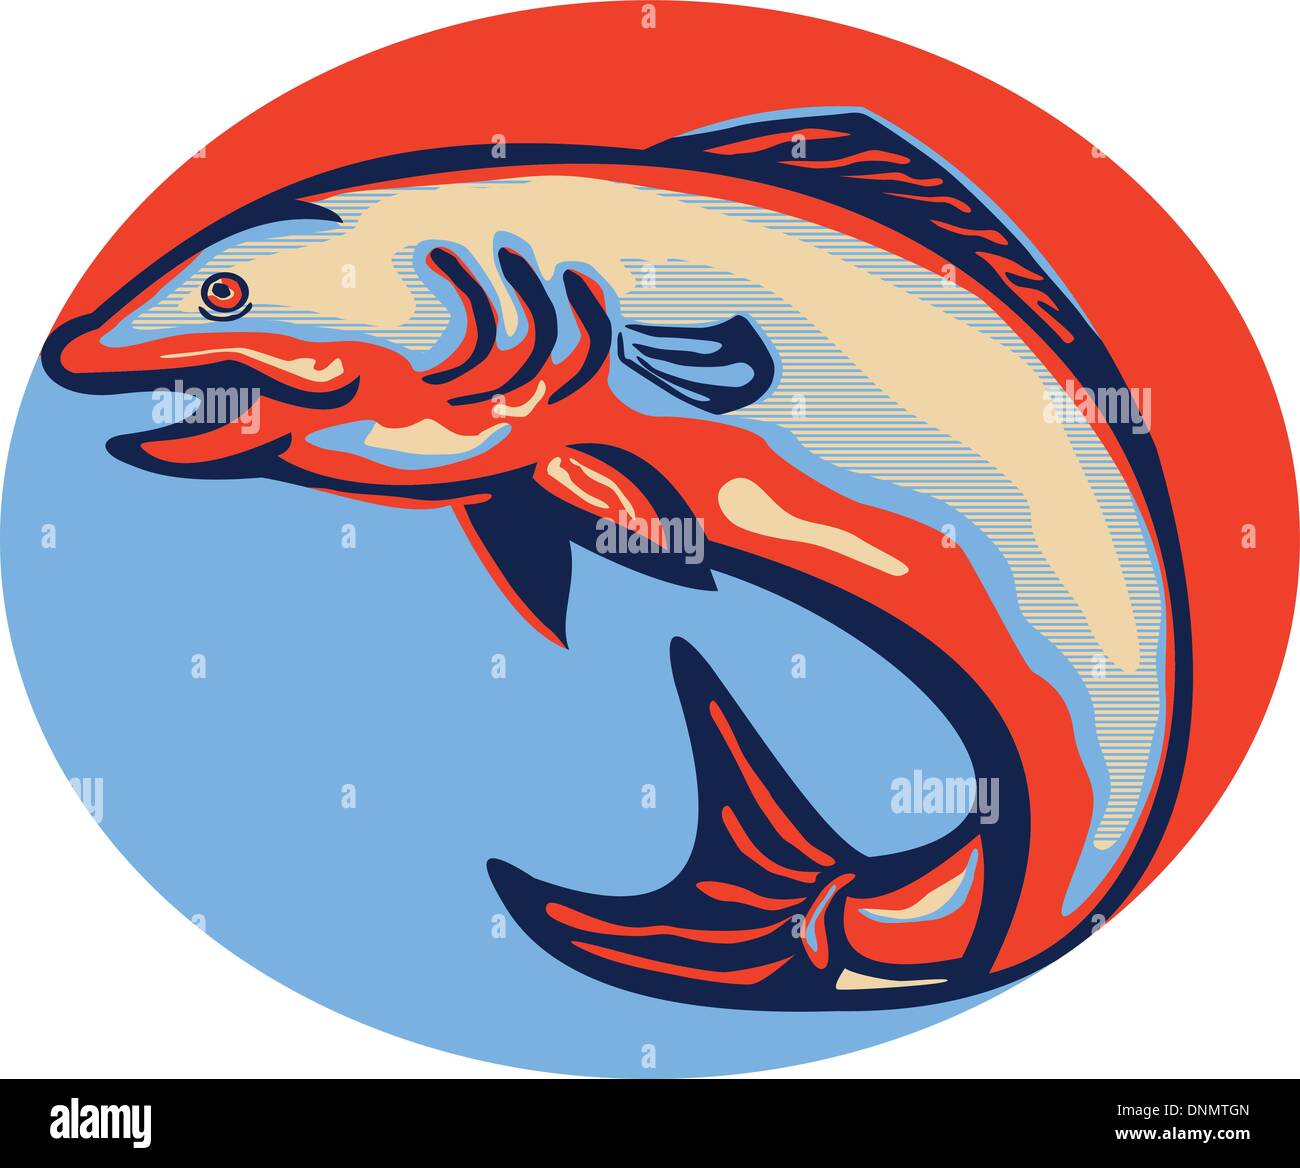 Illustration of an Atlantic salmon fish jumping done in retro style Stock Vector